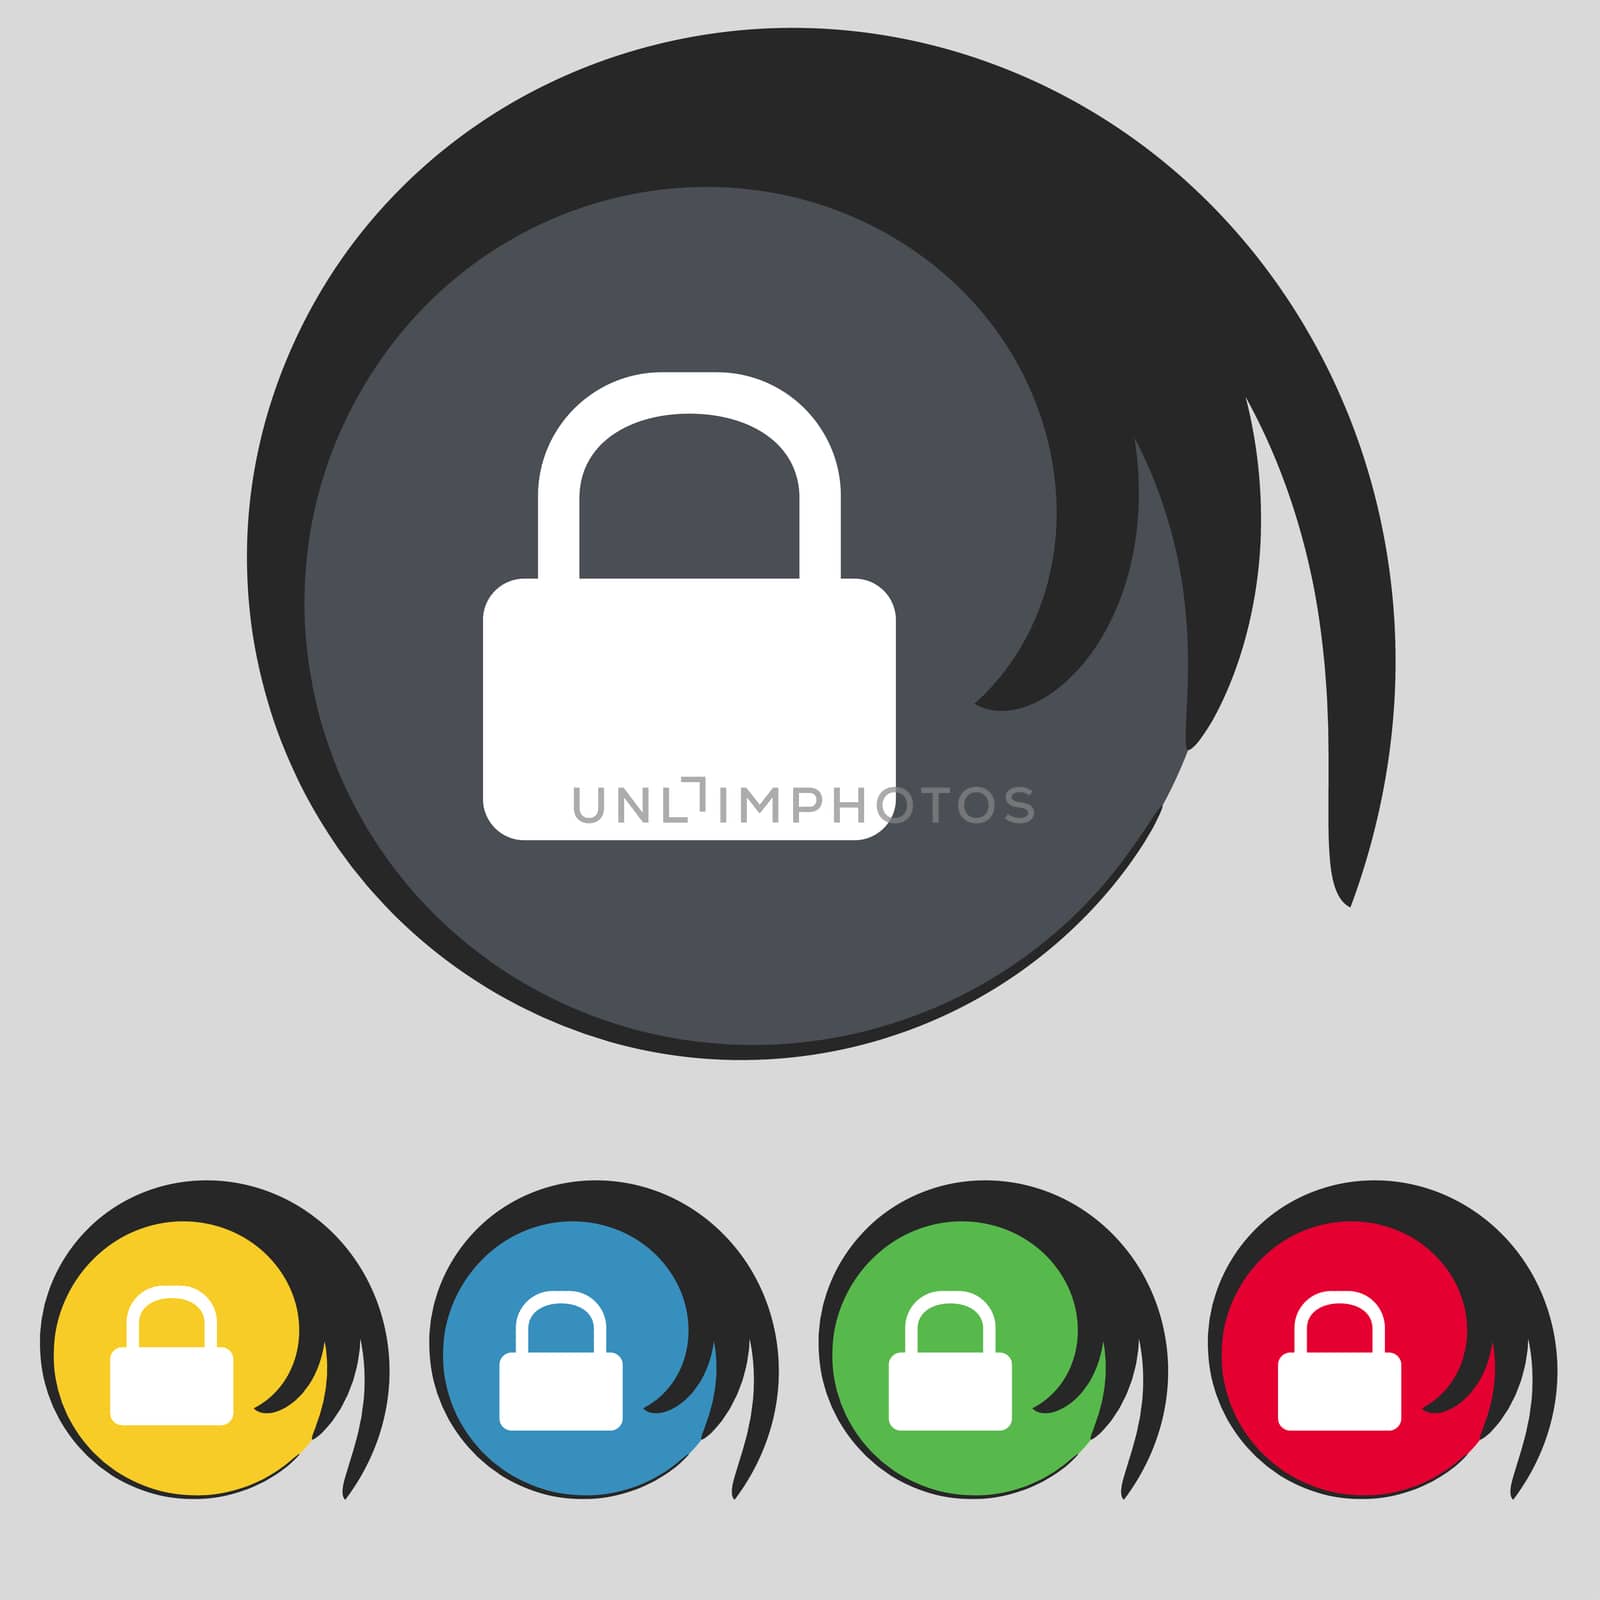 Pad Lock icon sign. Symbol on five colored buttons. illustration